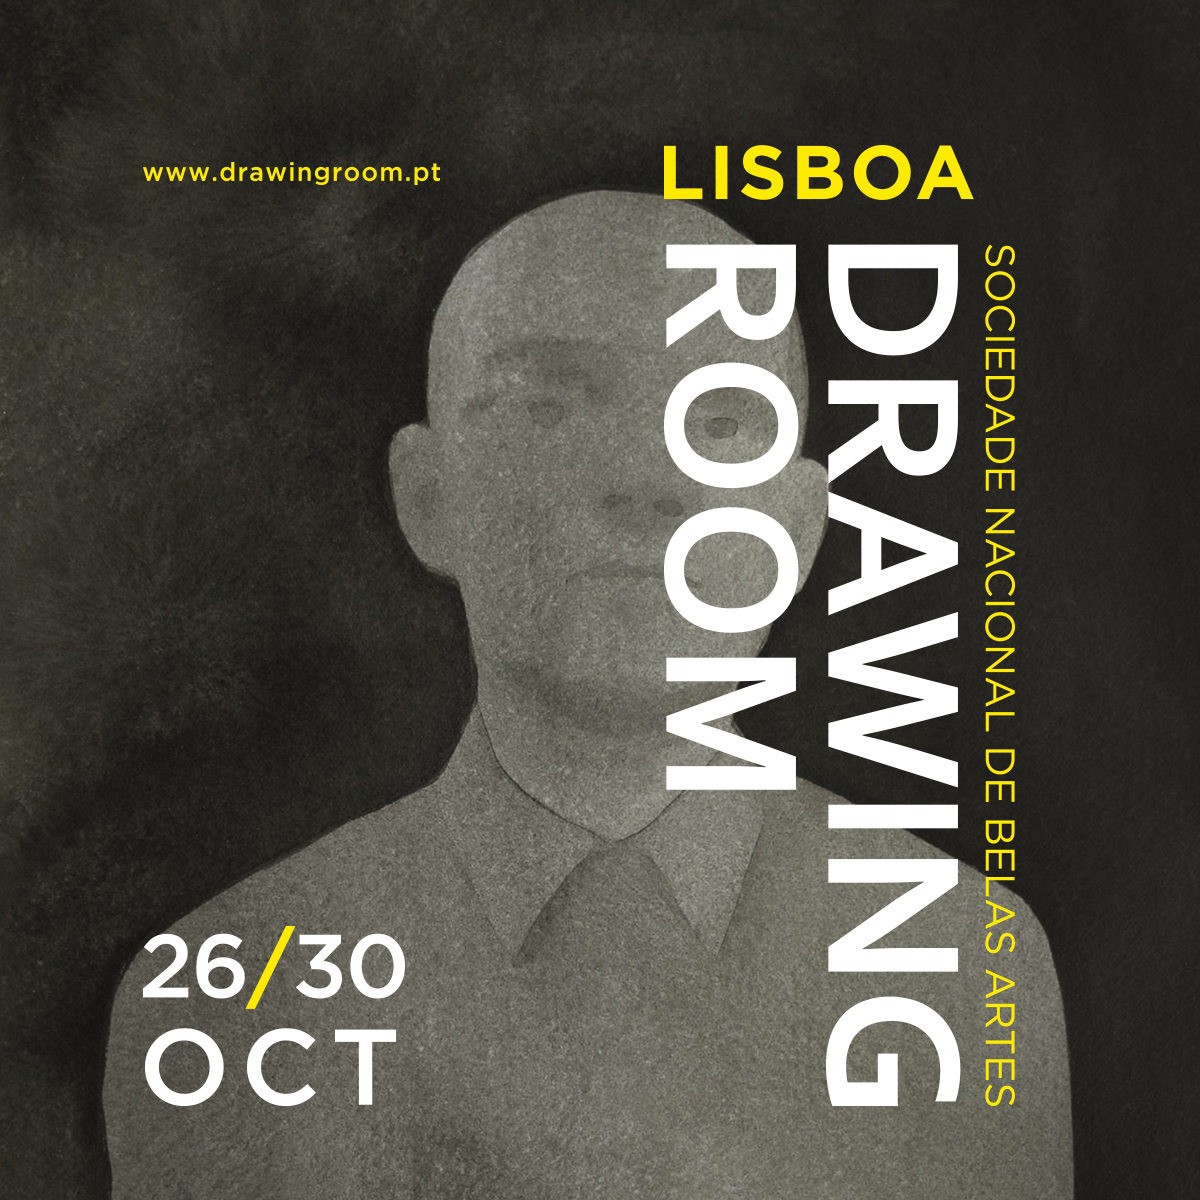 New image for the 5th edition of Drawing Room Lisboa